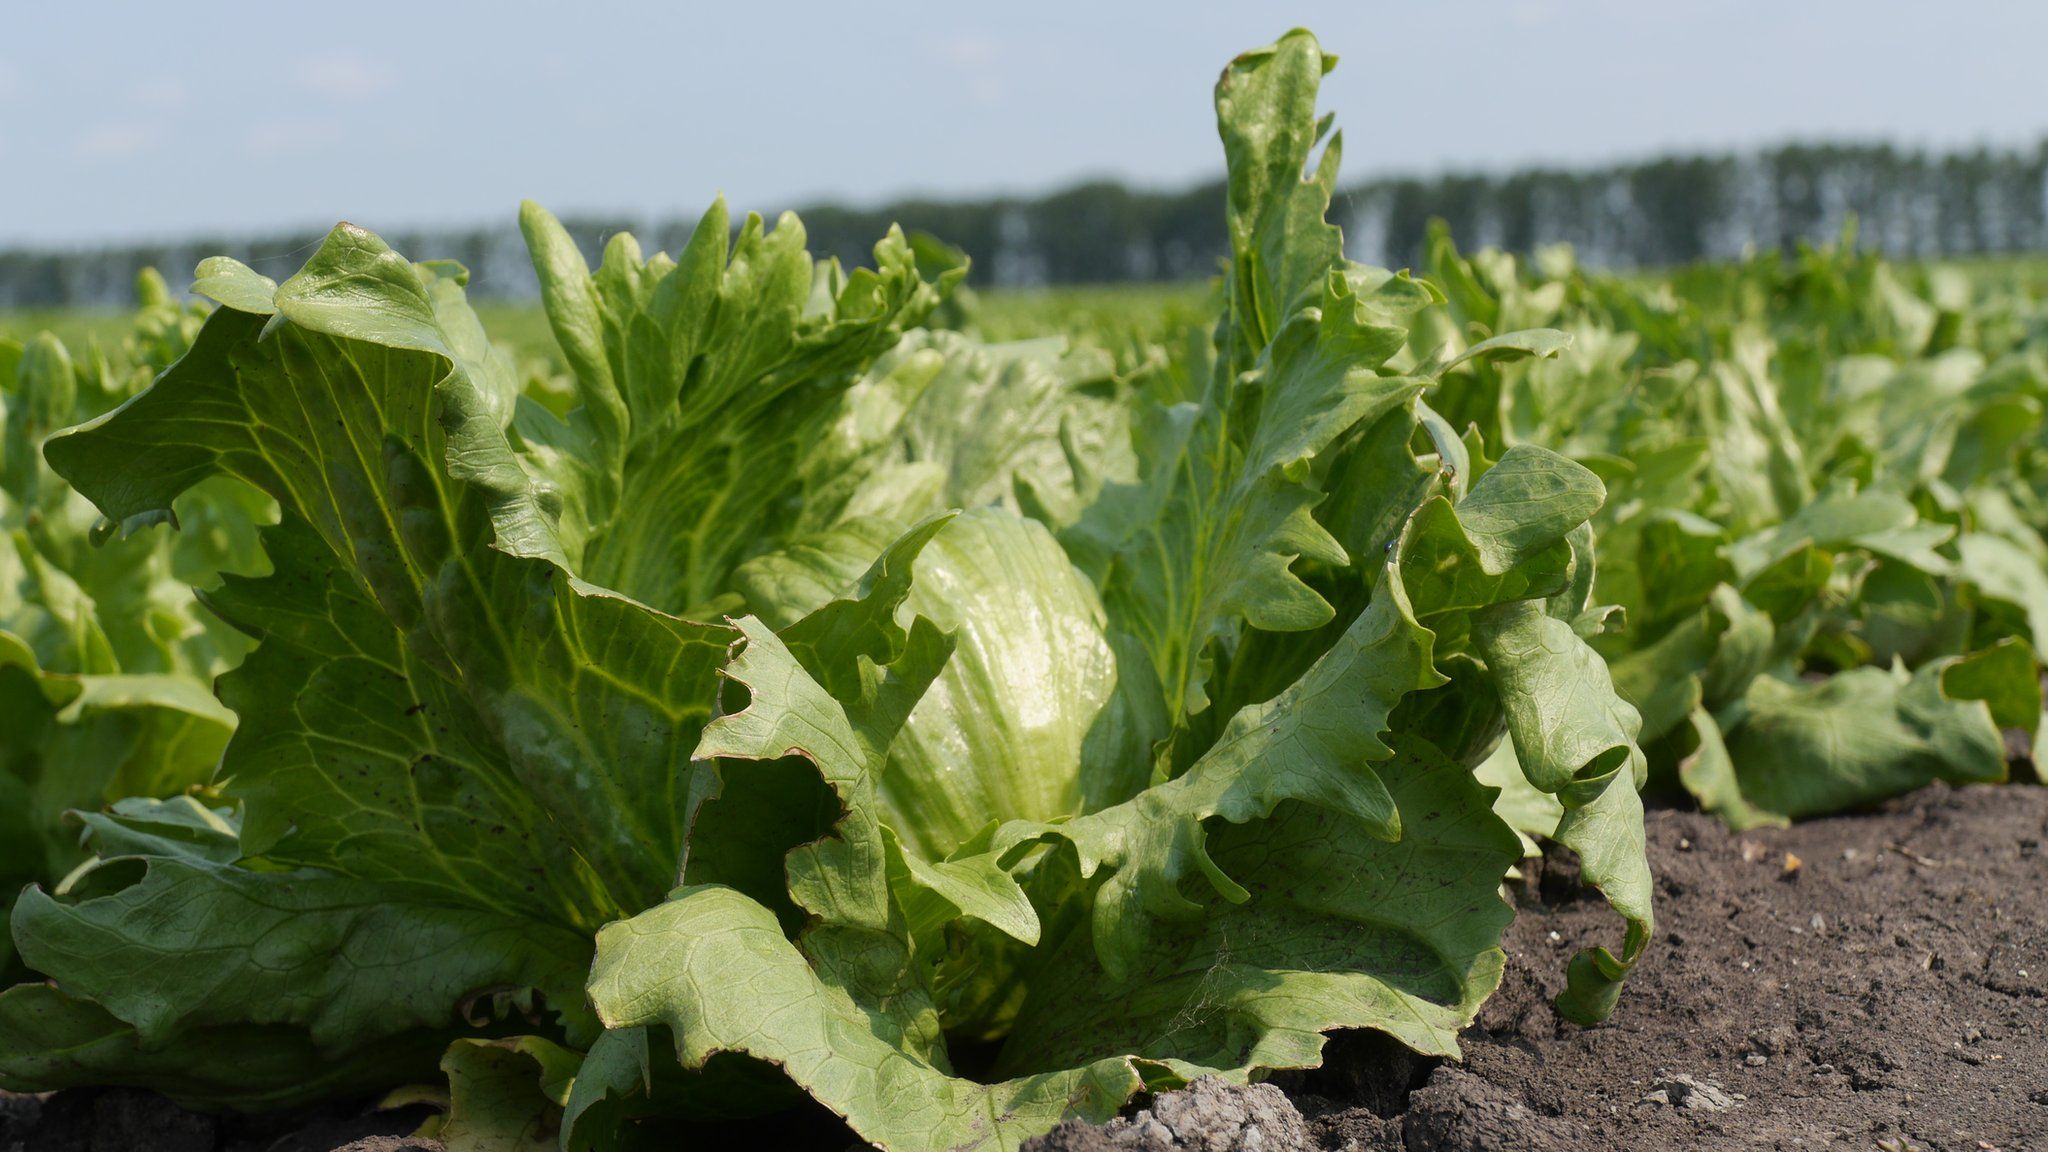 Close up on lettuce in field